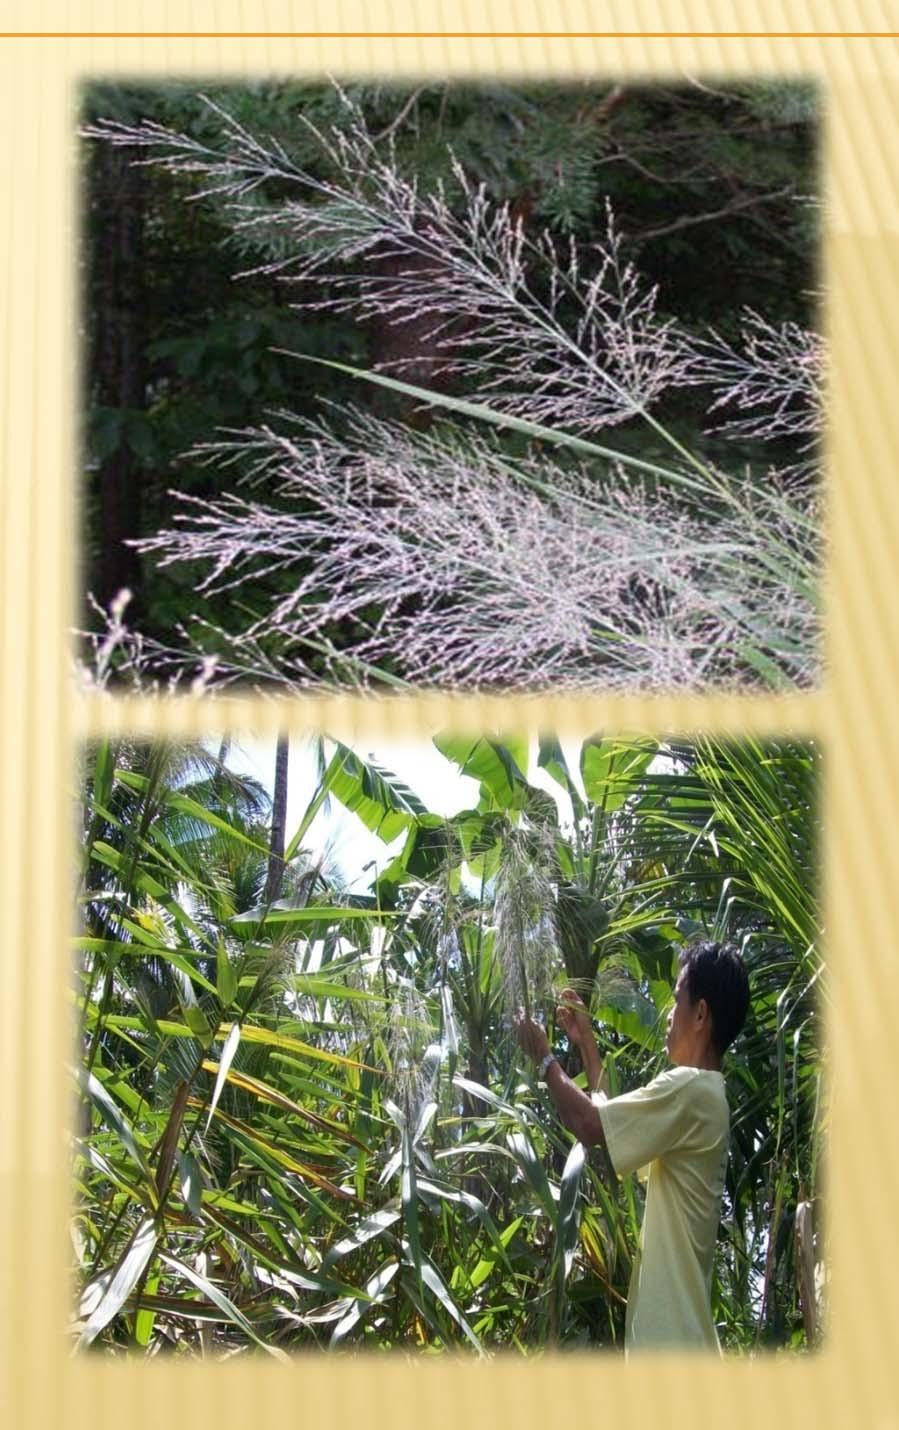 TIGER GRASS Tiger grass produces panicles for a maximum period of 10 years.